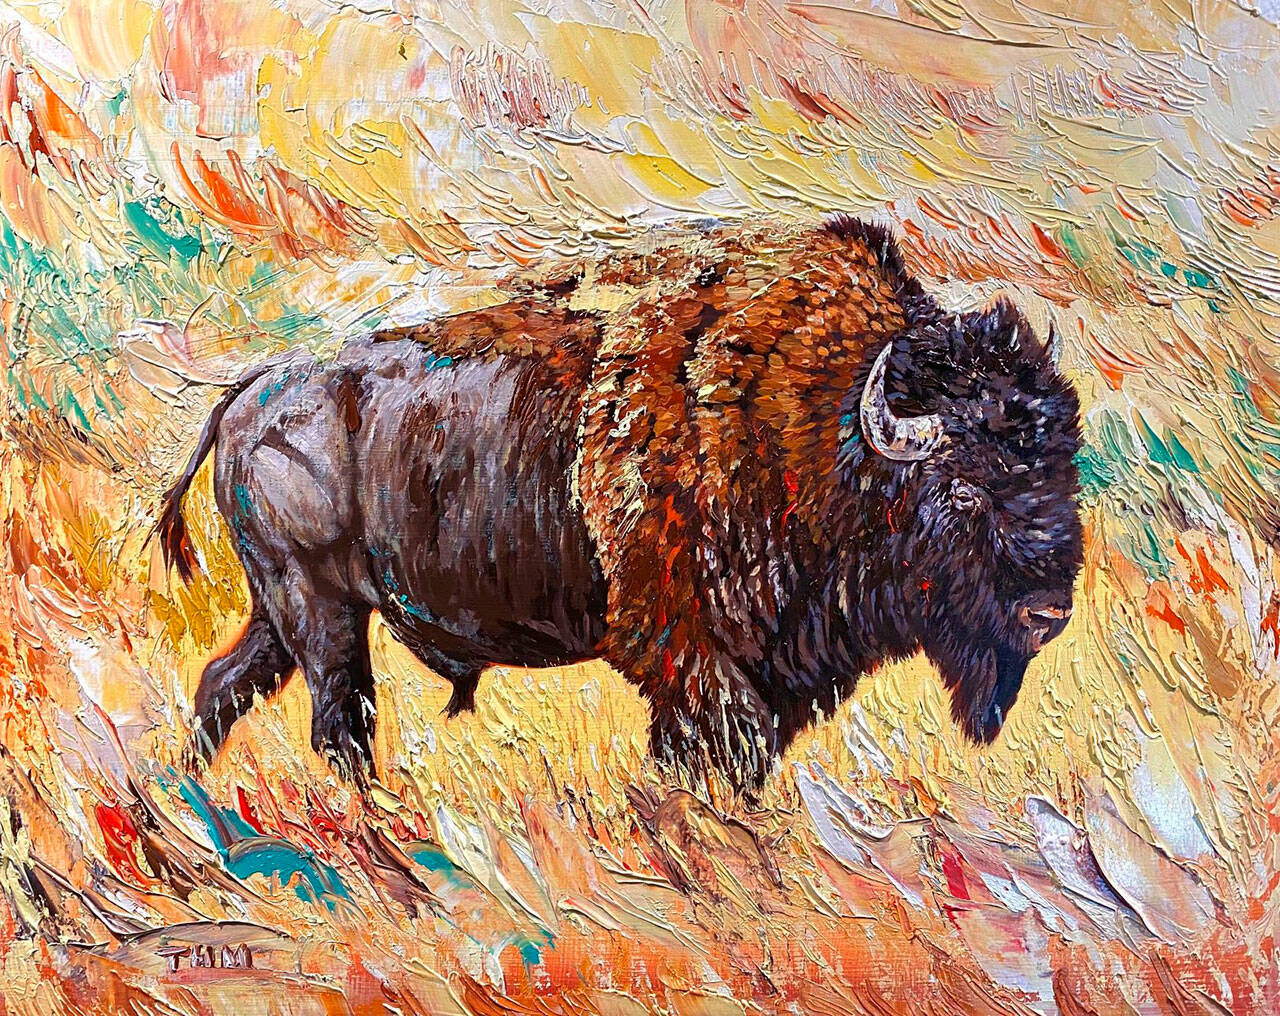 See oil paintings by Thomas McCaffferty, such as “Firehole Canyon” at the Cole Gallery in Edmonds starting Oct. 1.